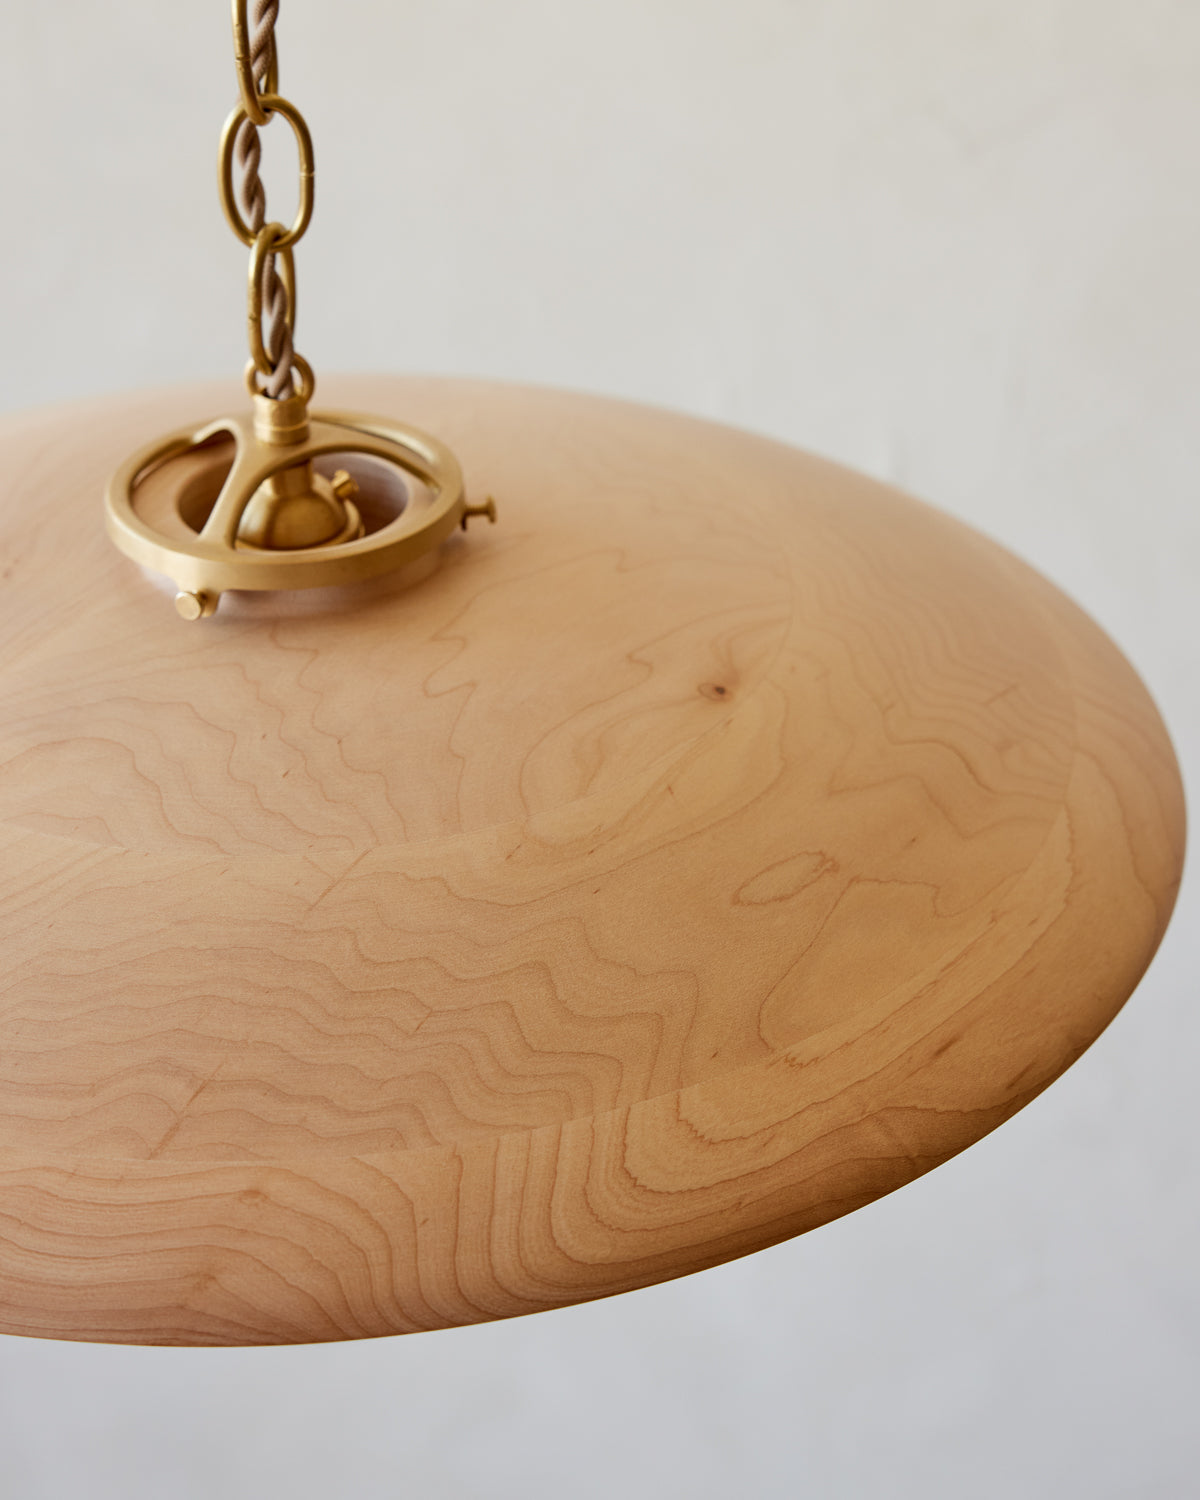 Large pendant light with oversized clear glass globe and decorative wooden clear maple shade with brass chain